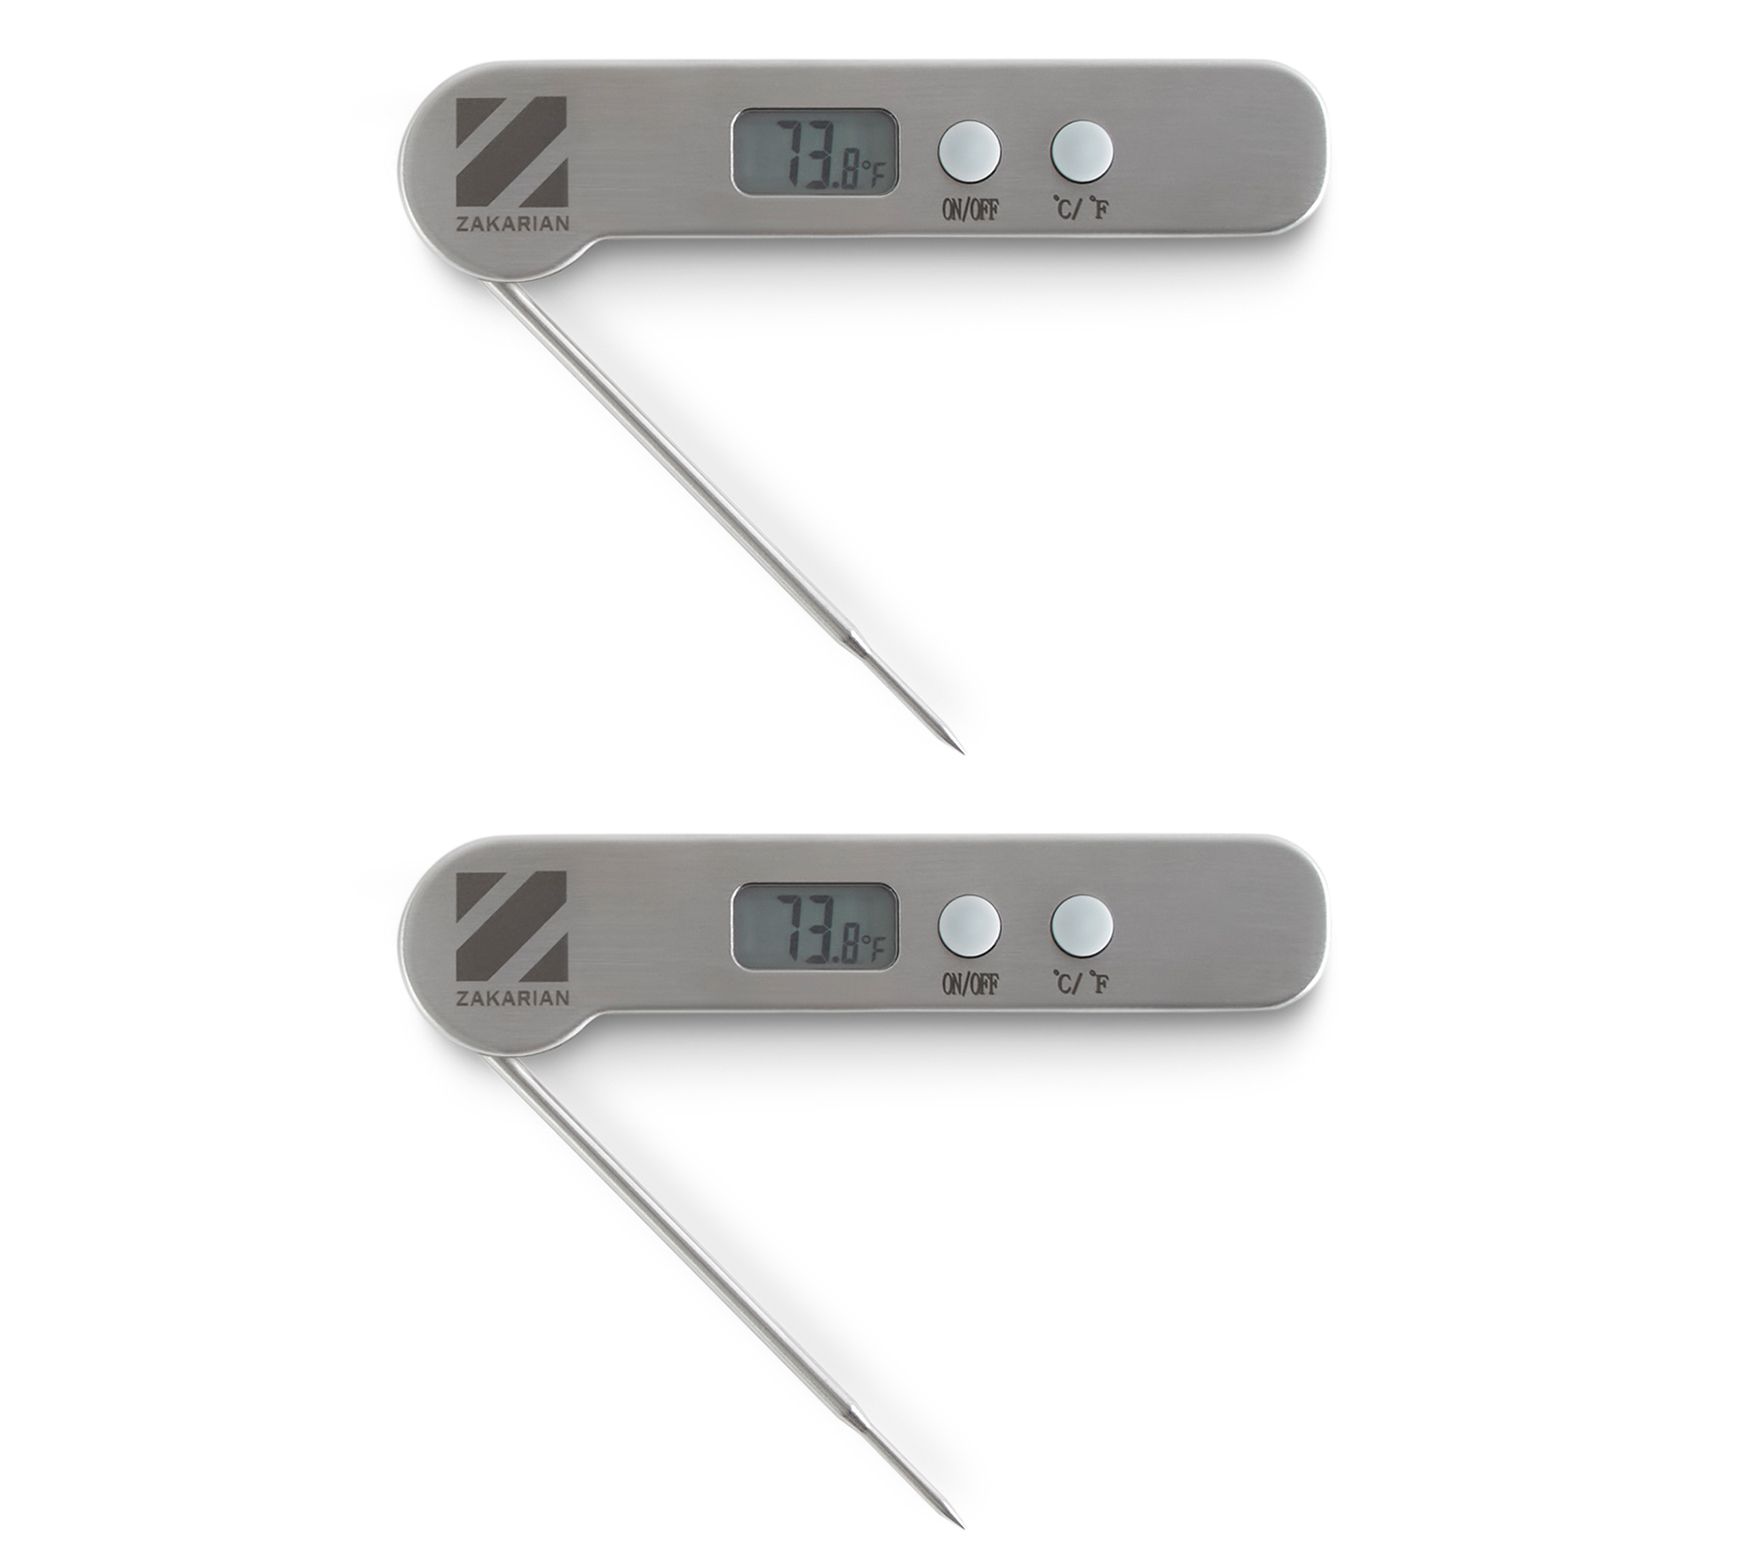 SDJMa Stainless Steel Oven Safe Meat Thermometer, Extra Large 2.4